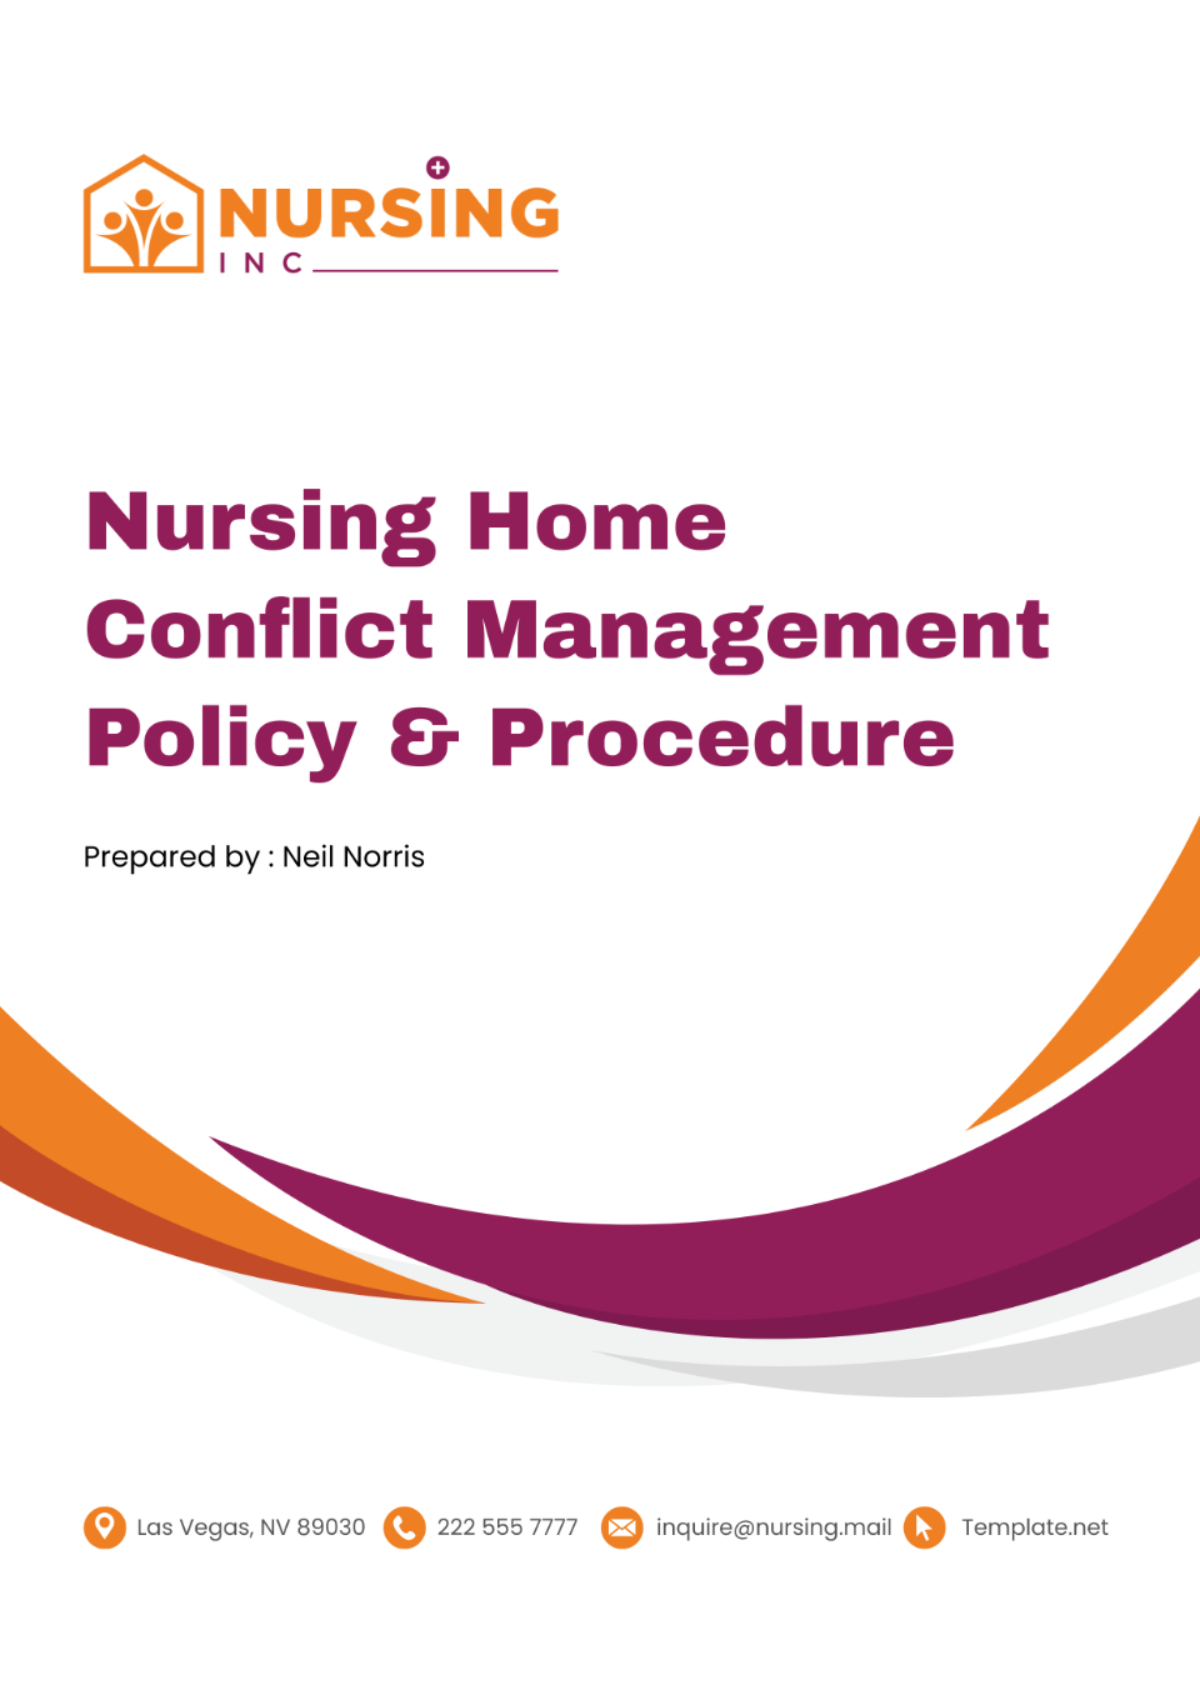 Free Nursing Home Conflict Management Policy & Procedure Template